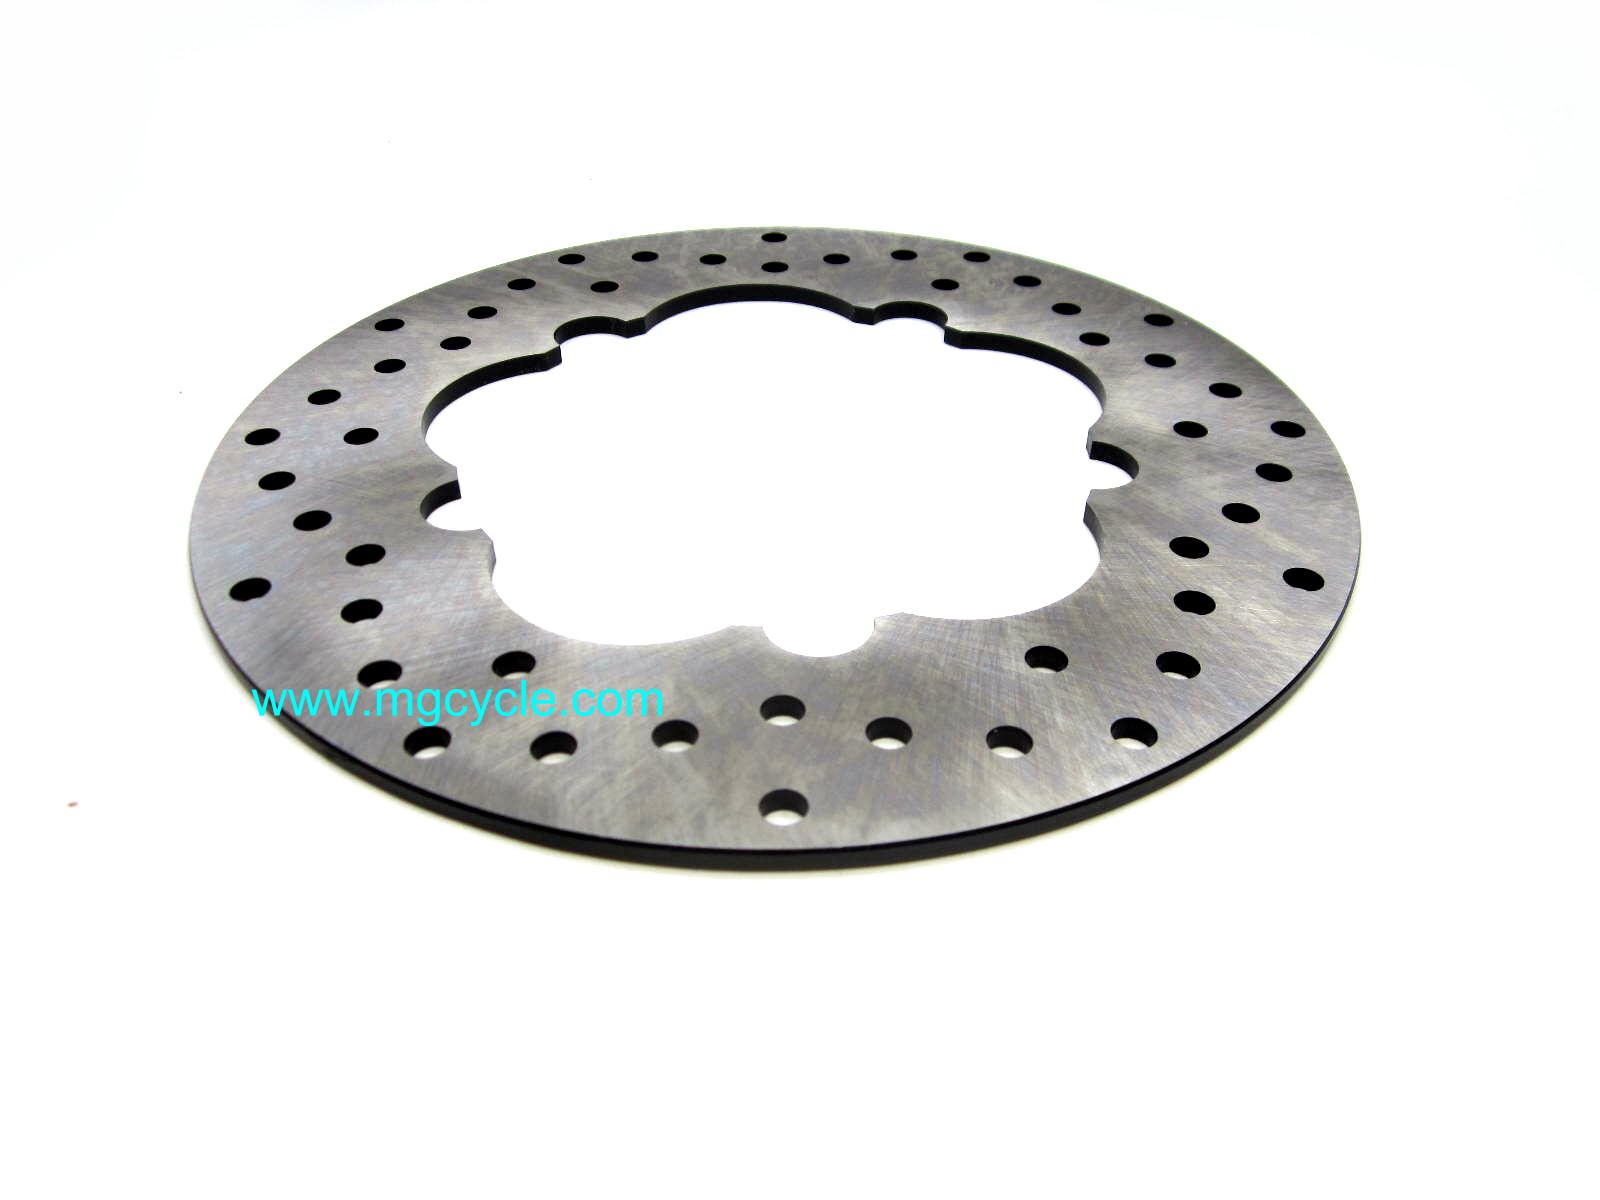 Brake disk LM4/5 SP3 Cal3 1000S, outer ring GU28613670 - Click Image to Close